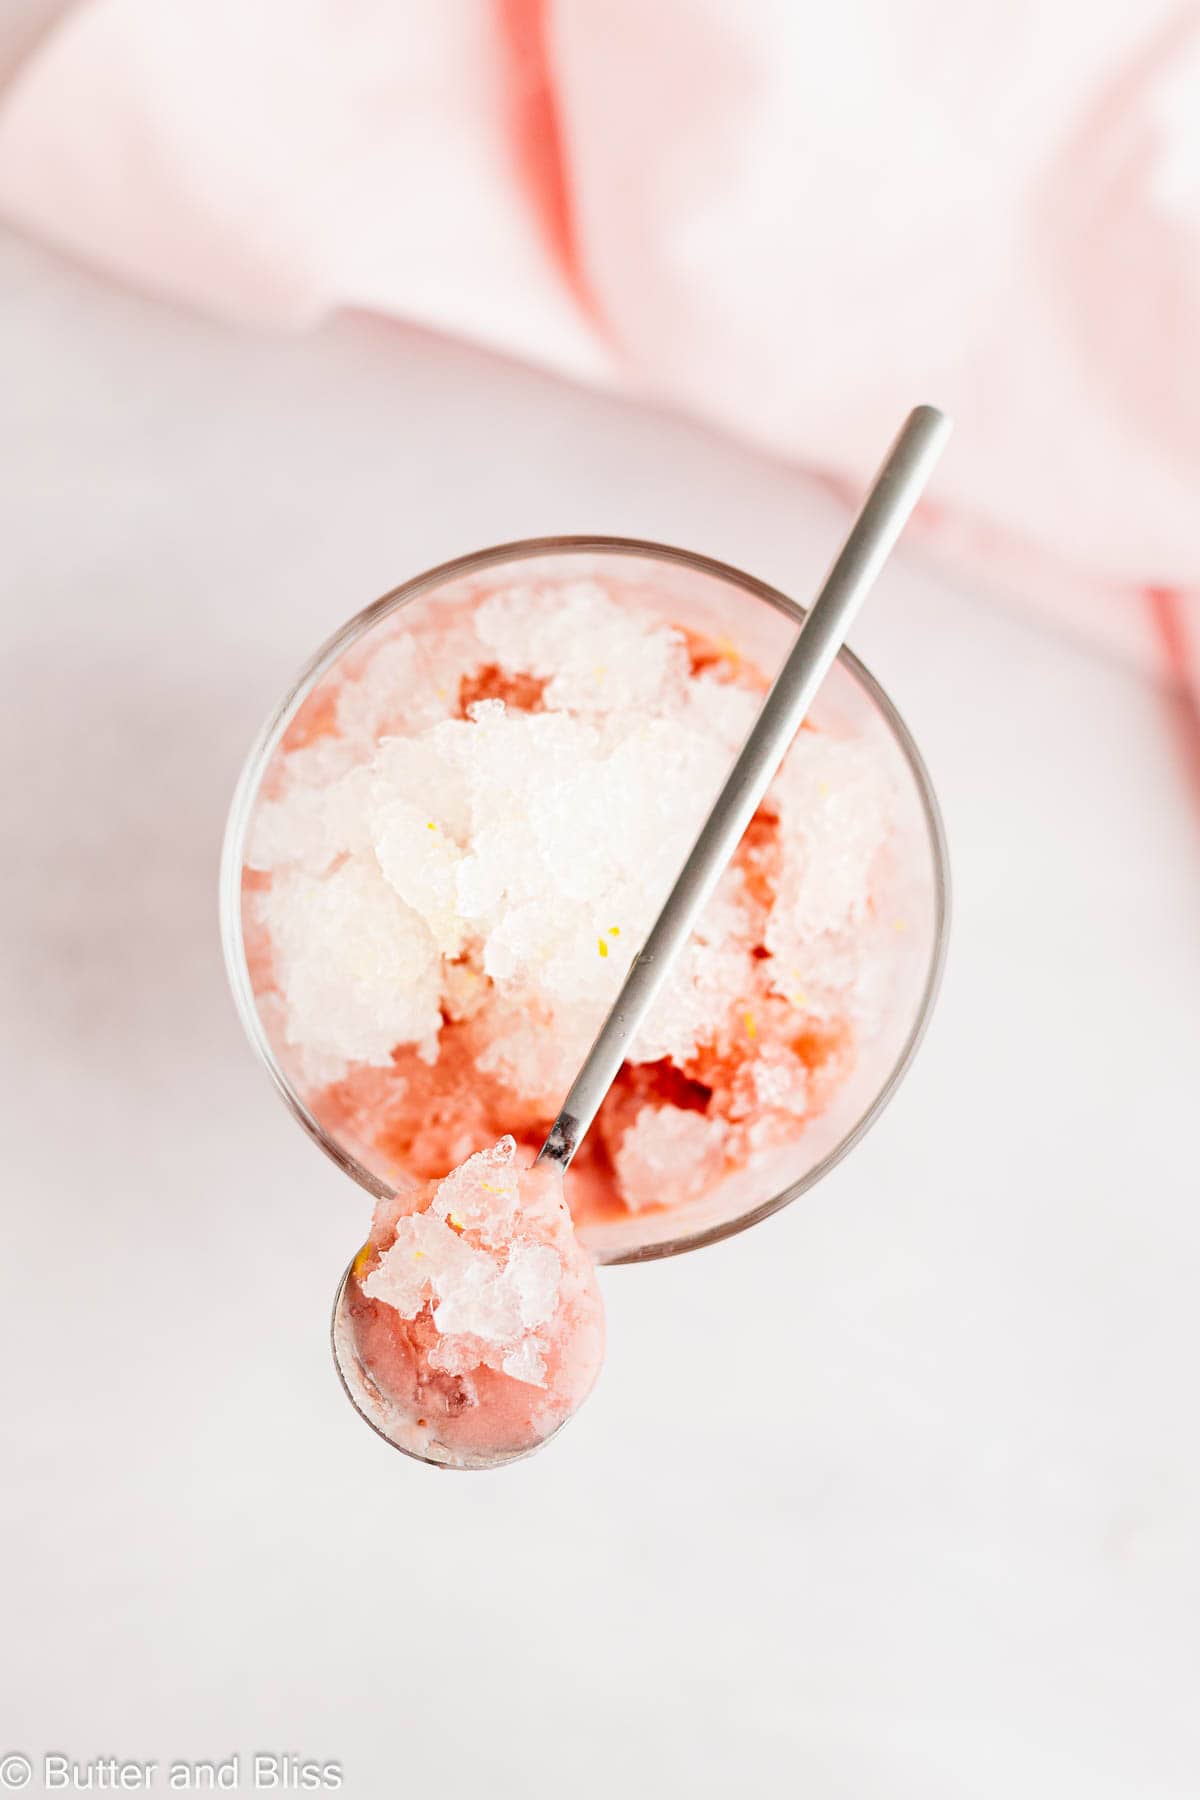 Pretty spoonful of chilly lemonade granita and strawberry pudding.